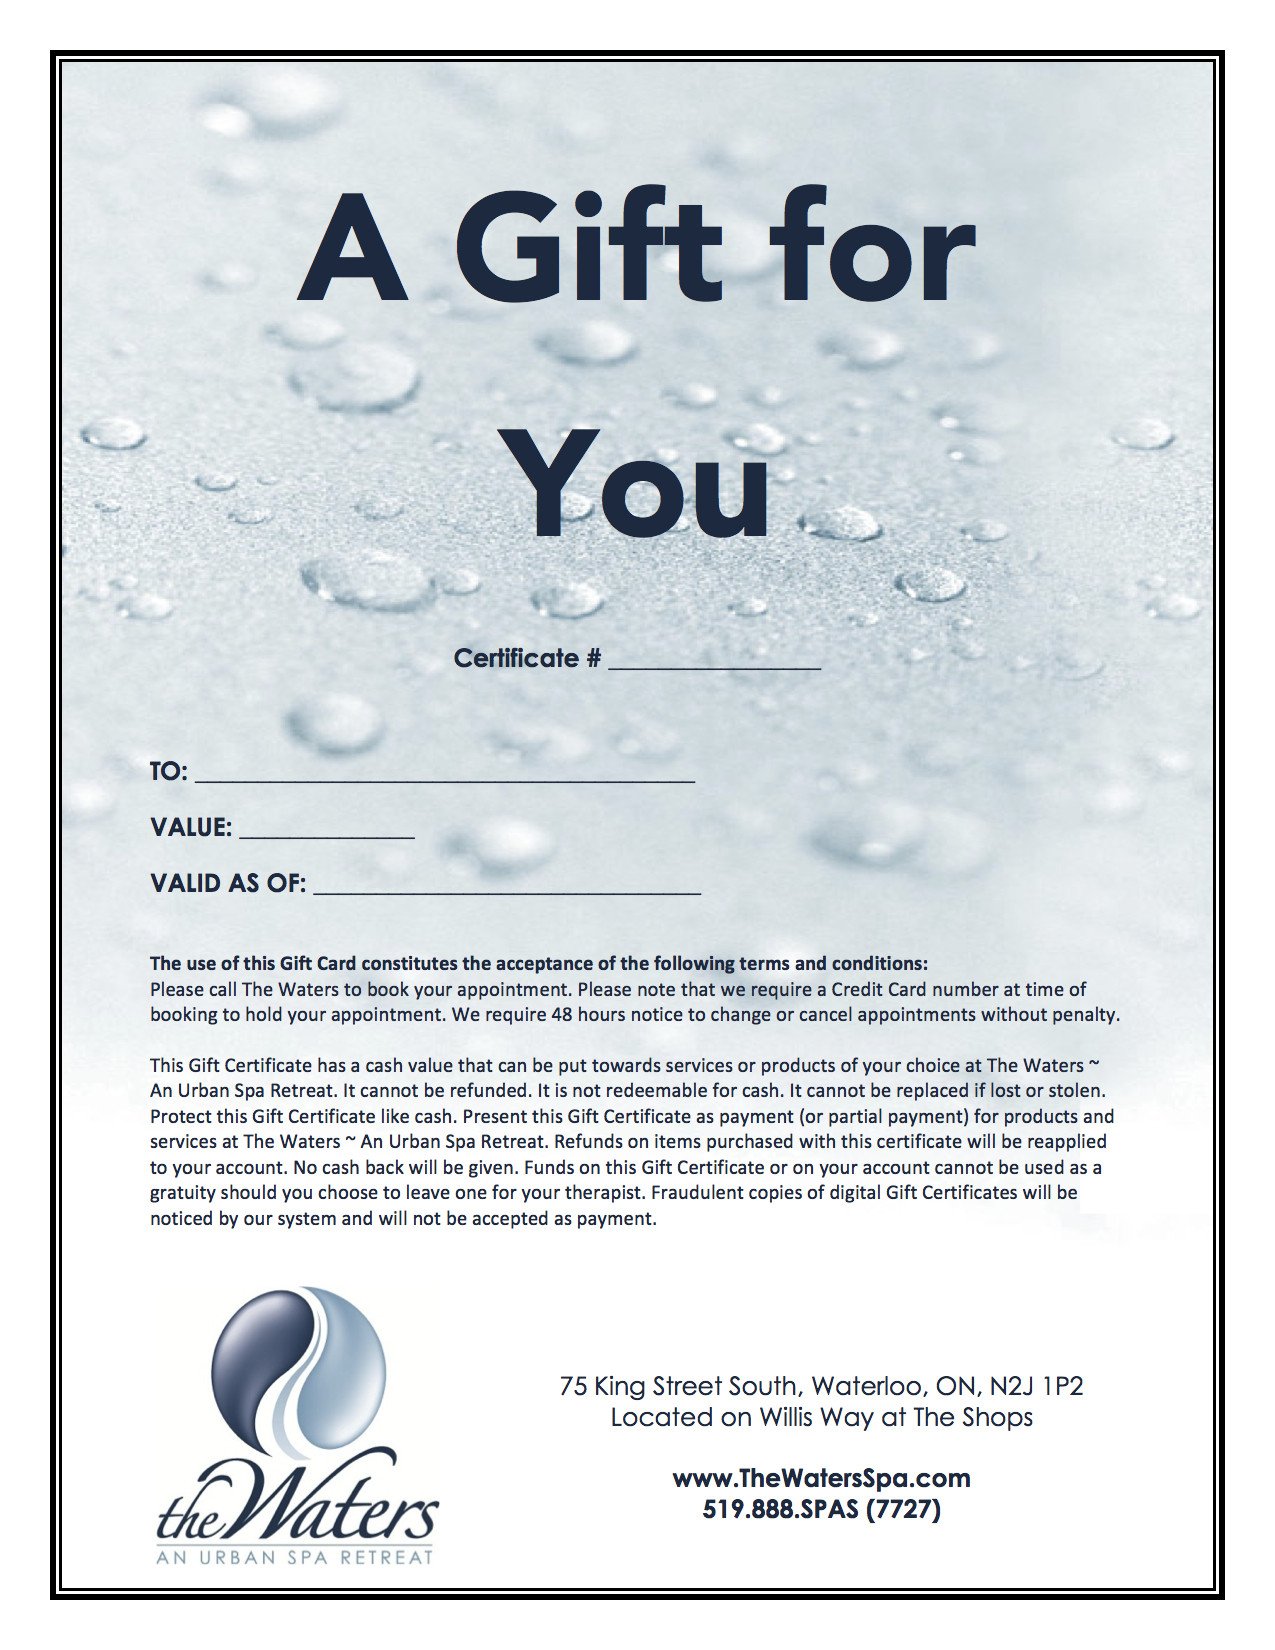 Email Gift Certificate The Waters Spa